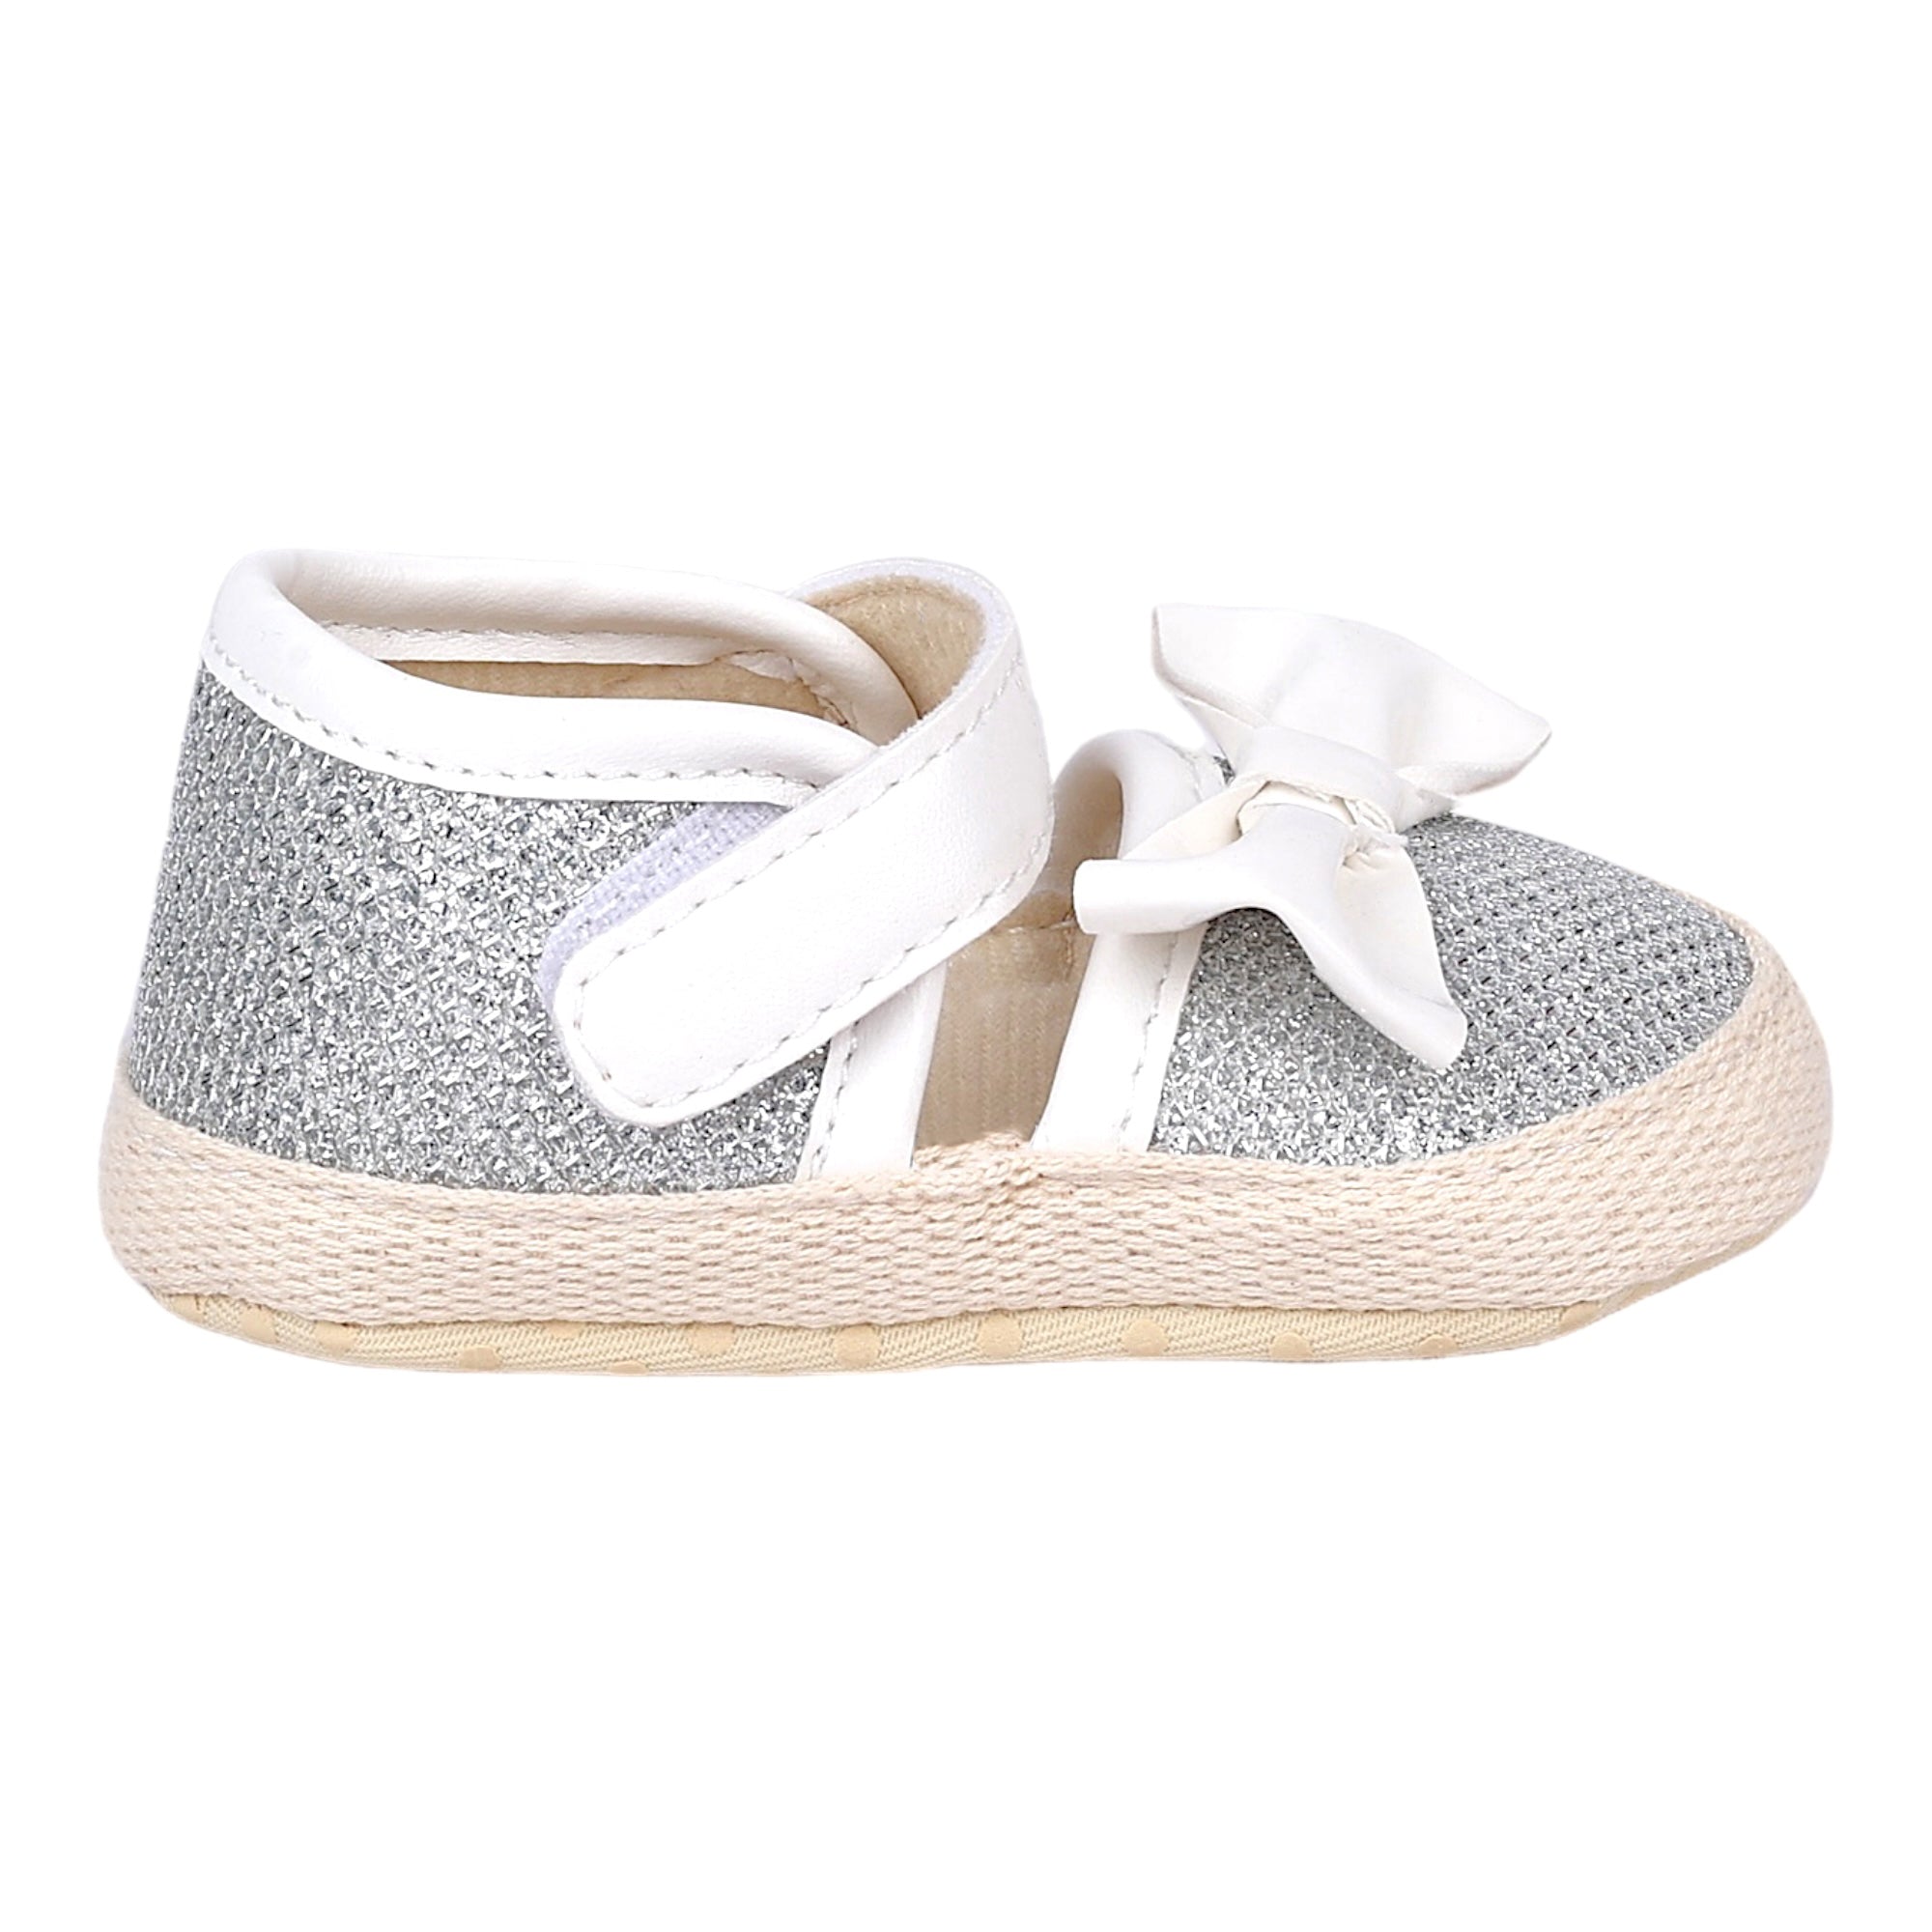 Baby Moo Glittery Partywear Bow Velcro Strap Anti-Skid Sandals - White